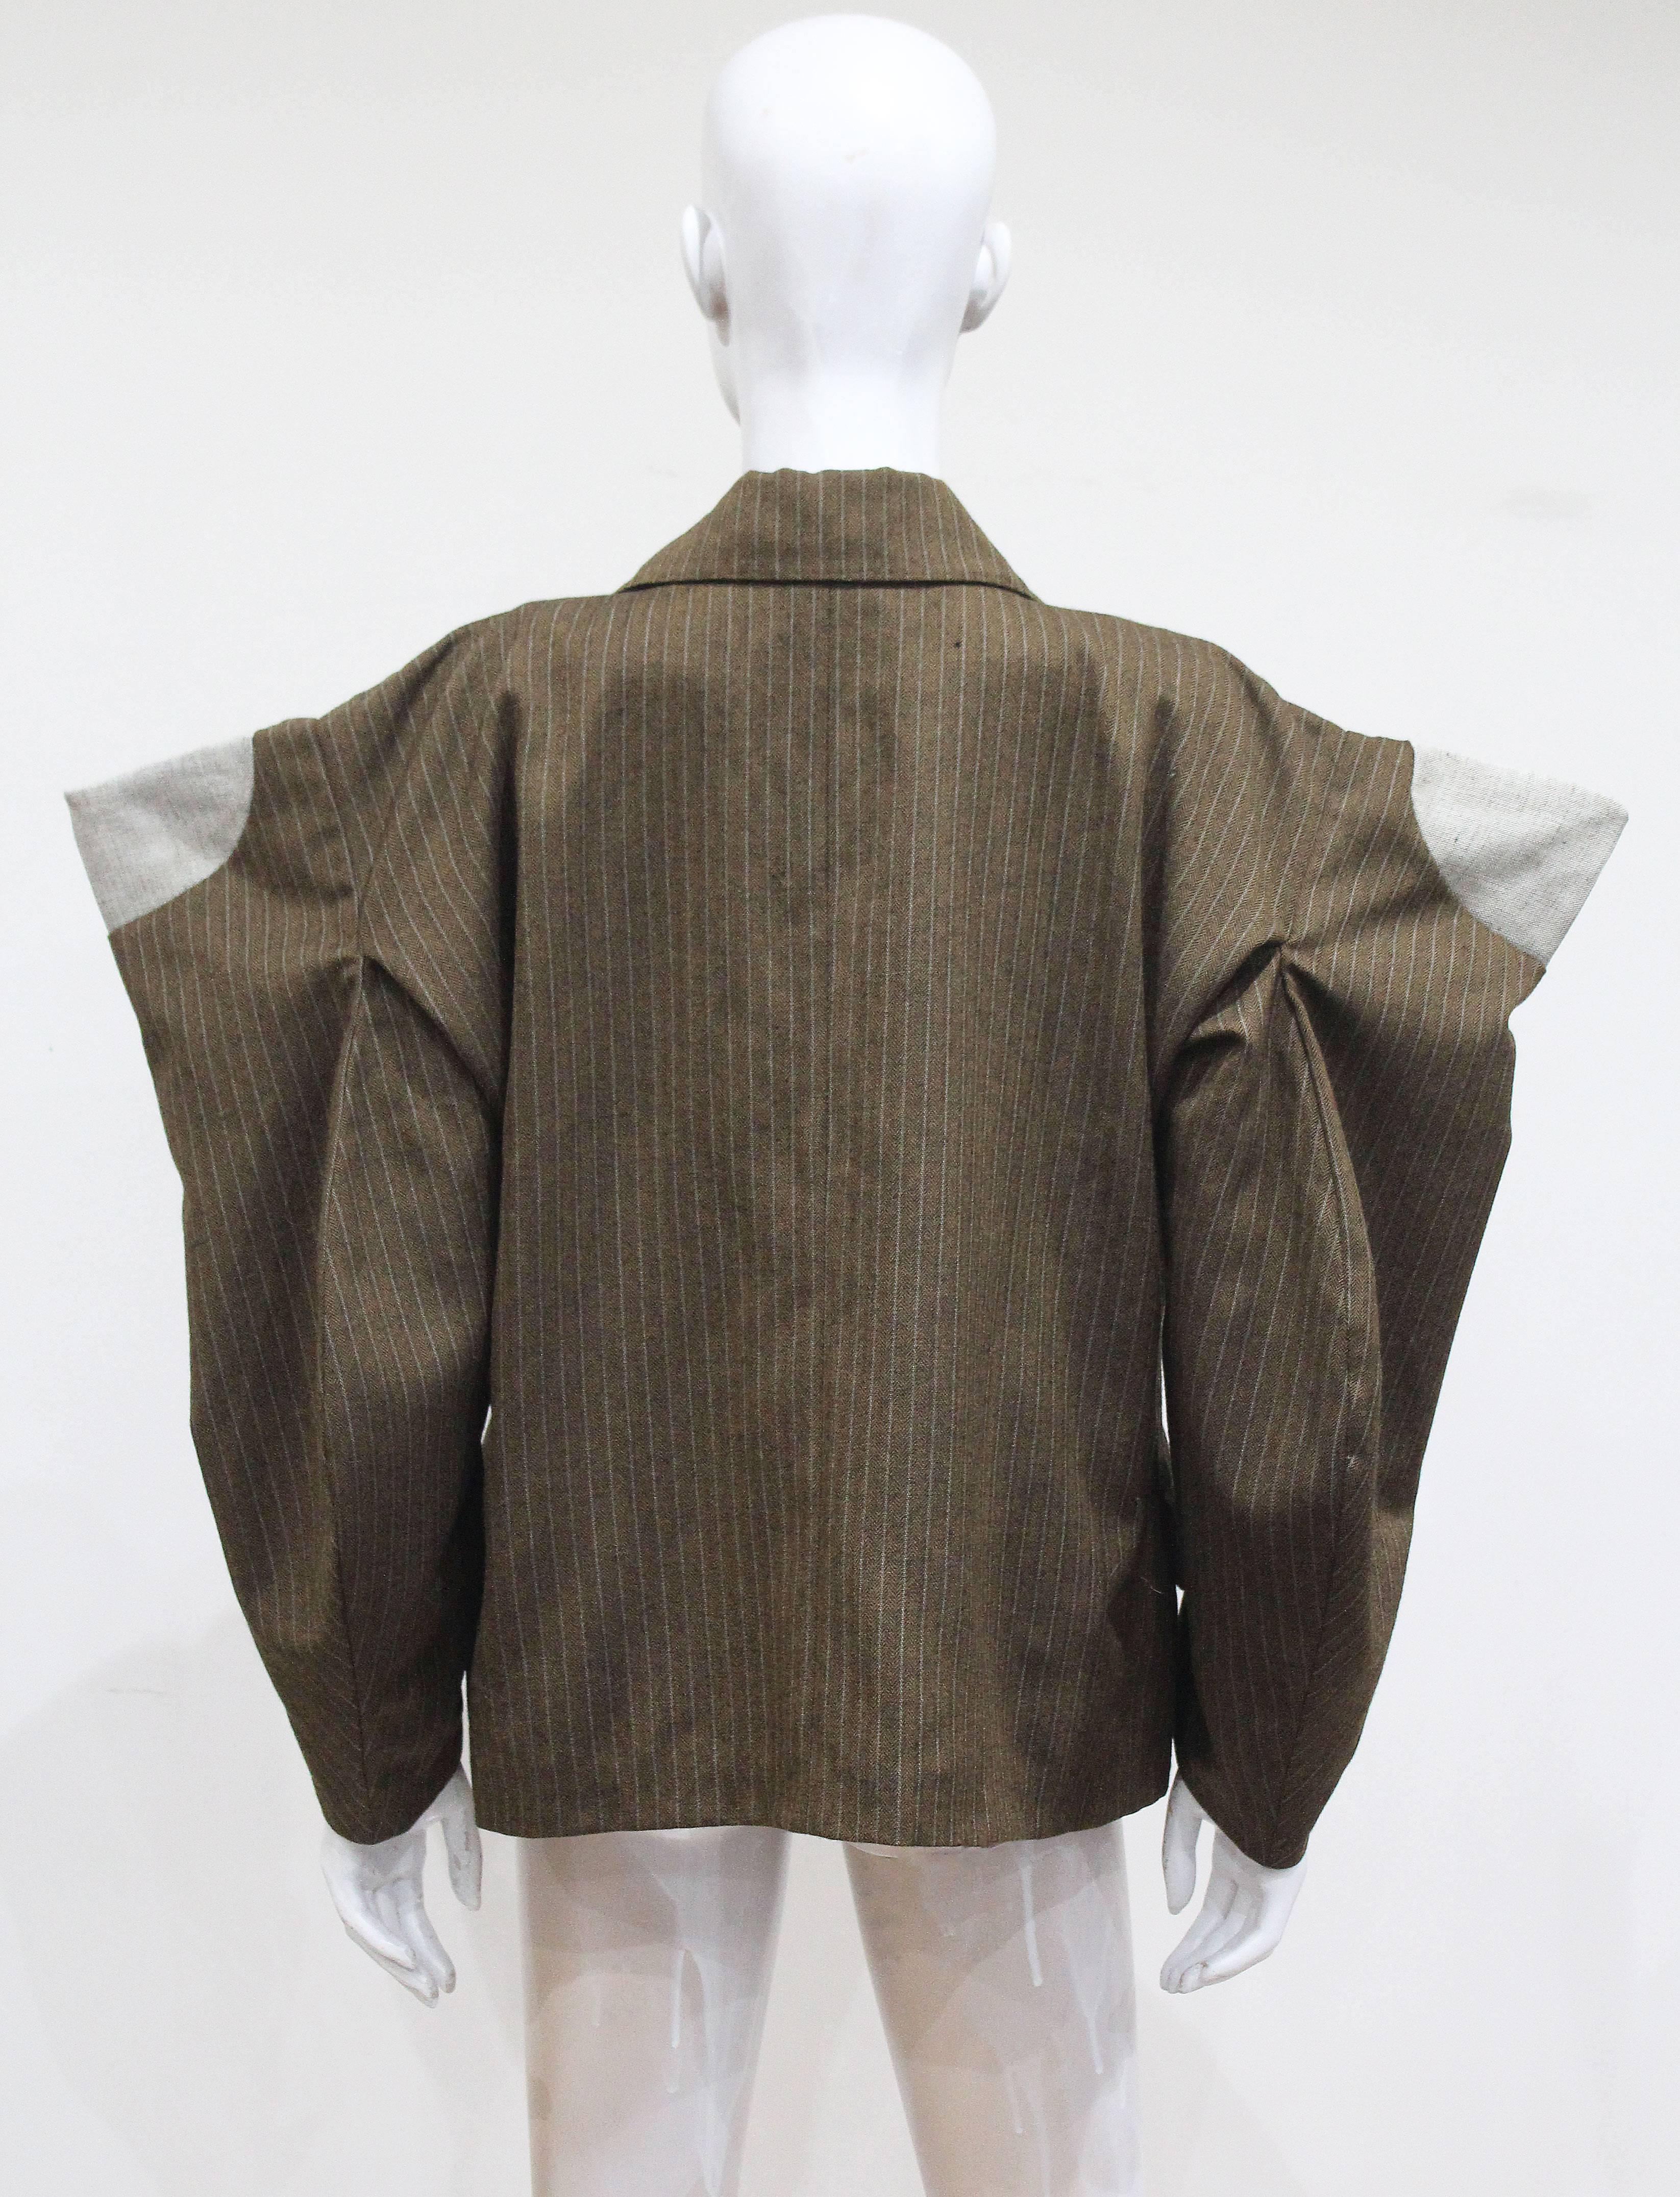 Women's or Men's World's End by Vivienne Westwood and Malcolm Mclaren 'Witches' jacket c. 1983